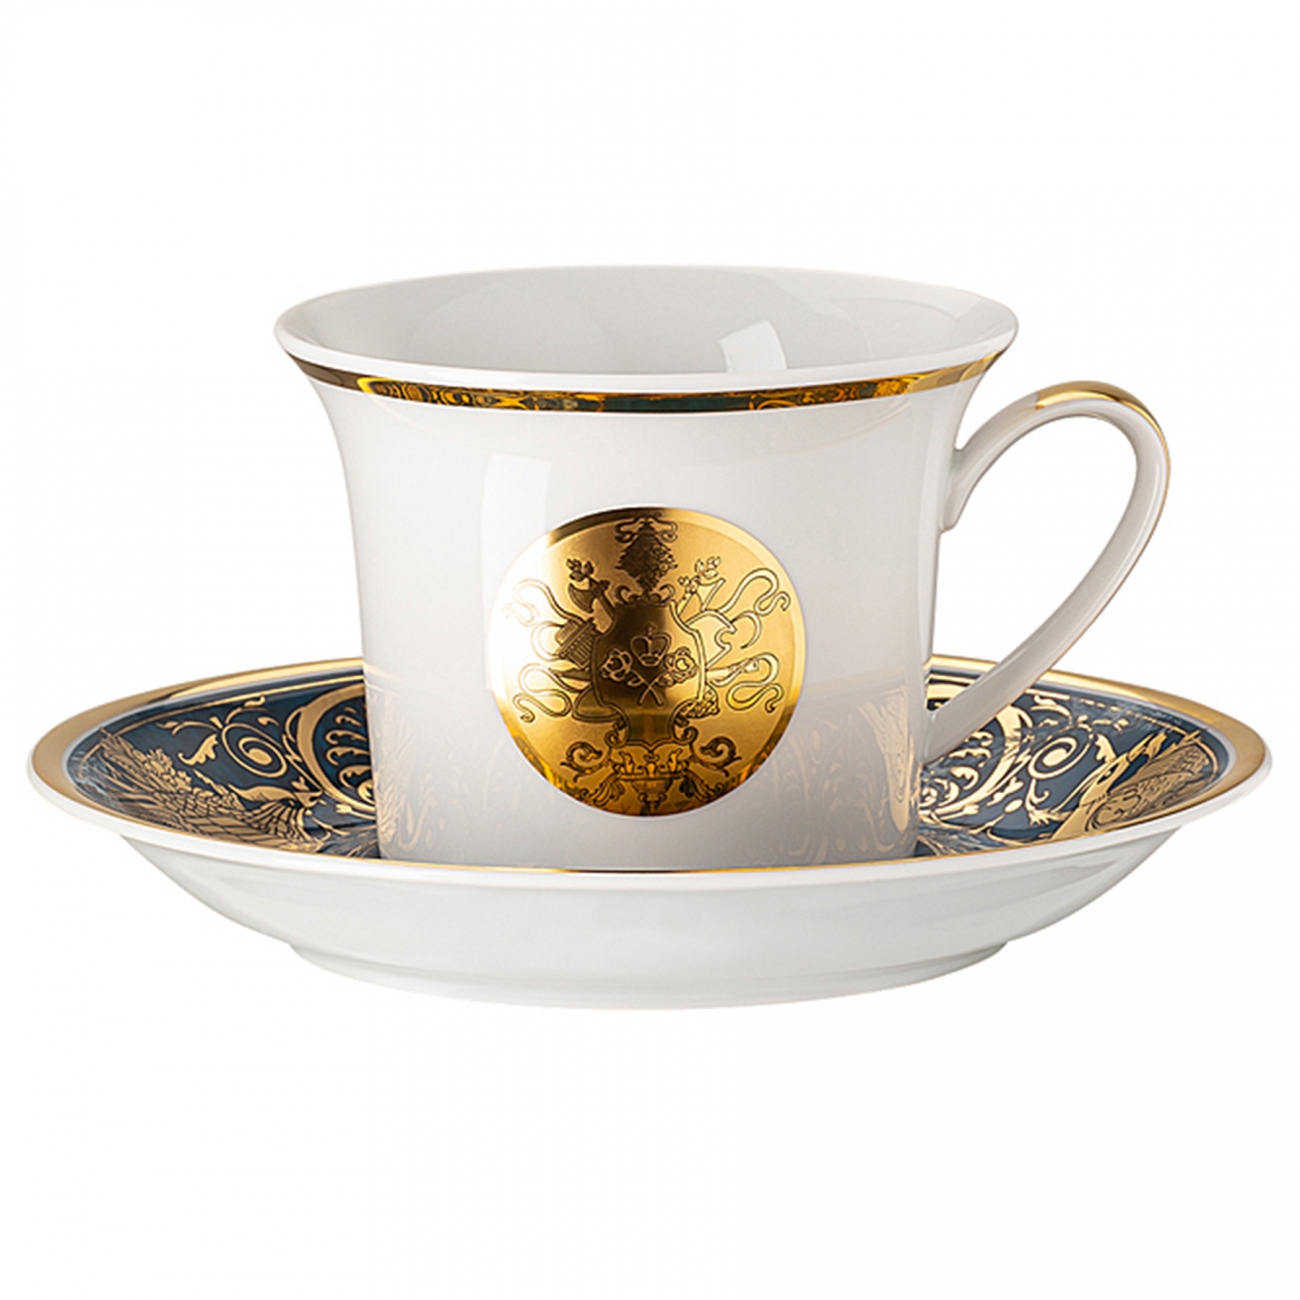 Rosenthal Heritage Dynasty Tazza cappuccino